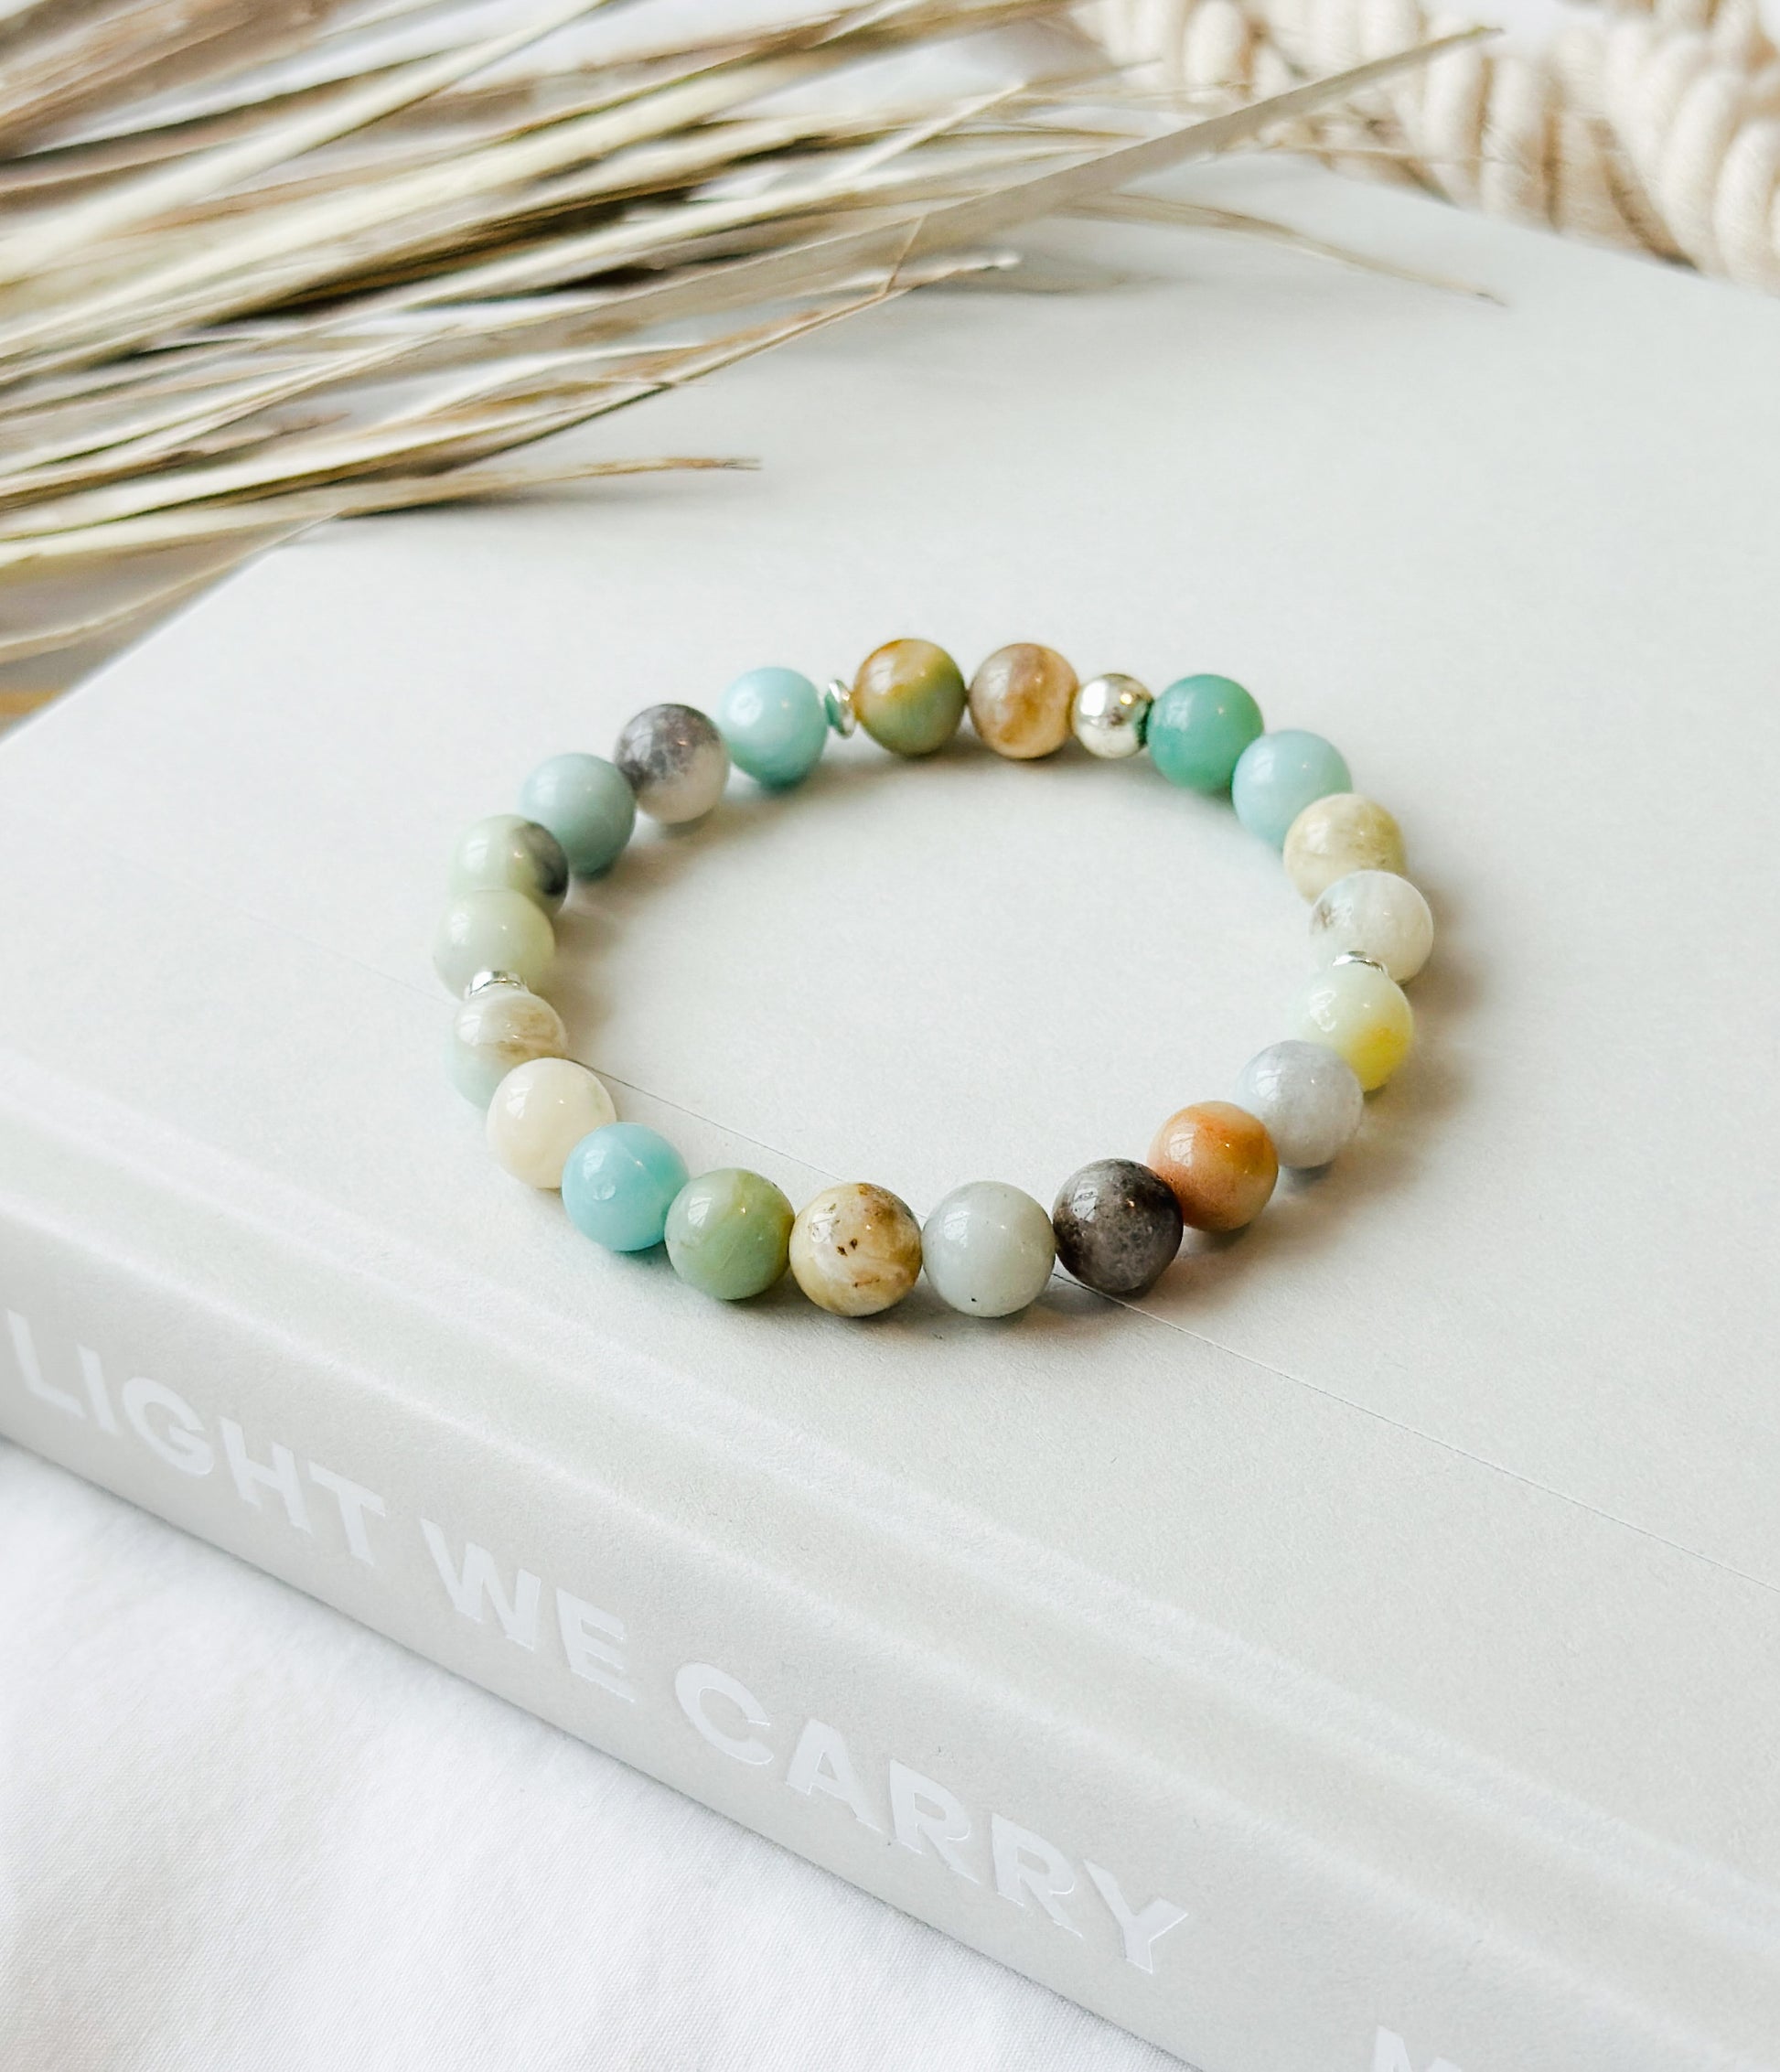 The "Serene Jungle" bracelet, a masterfully crafted piece adorned with Amazonite gemstones, renowned for their healing properties.